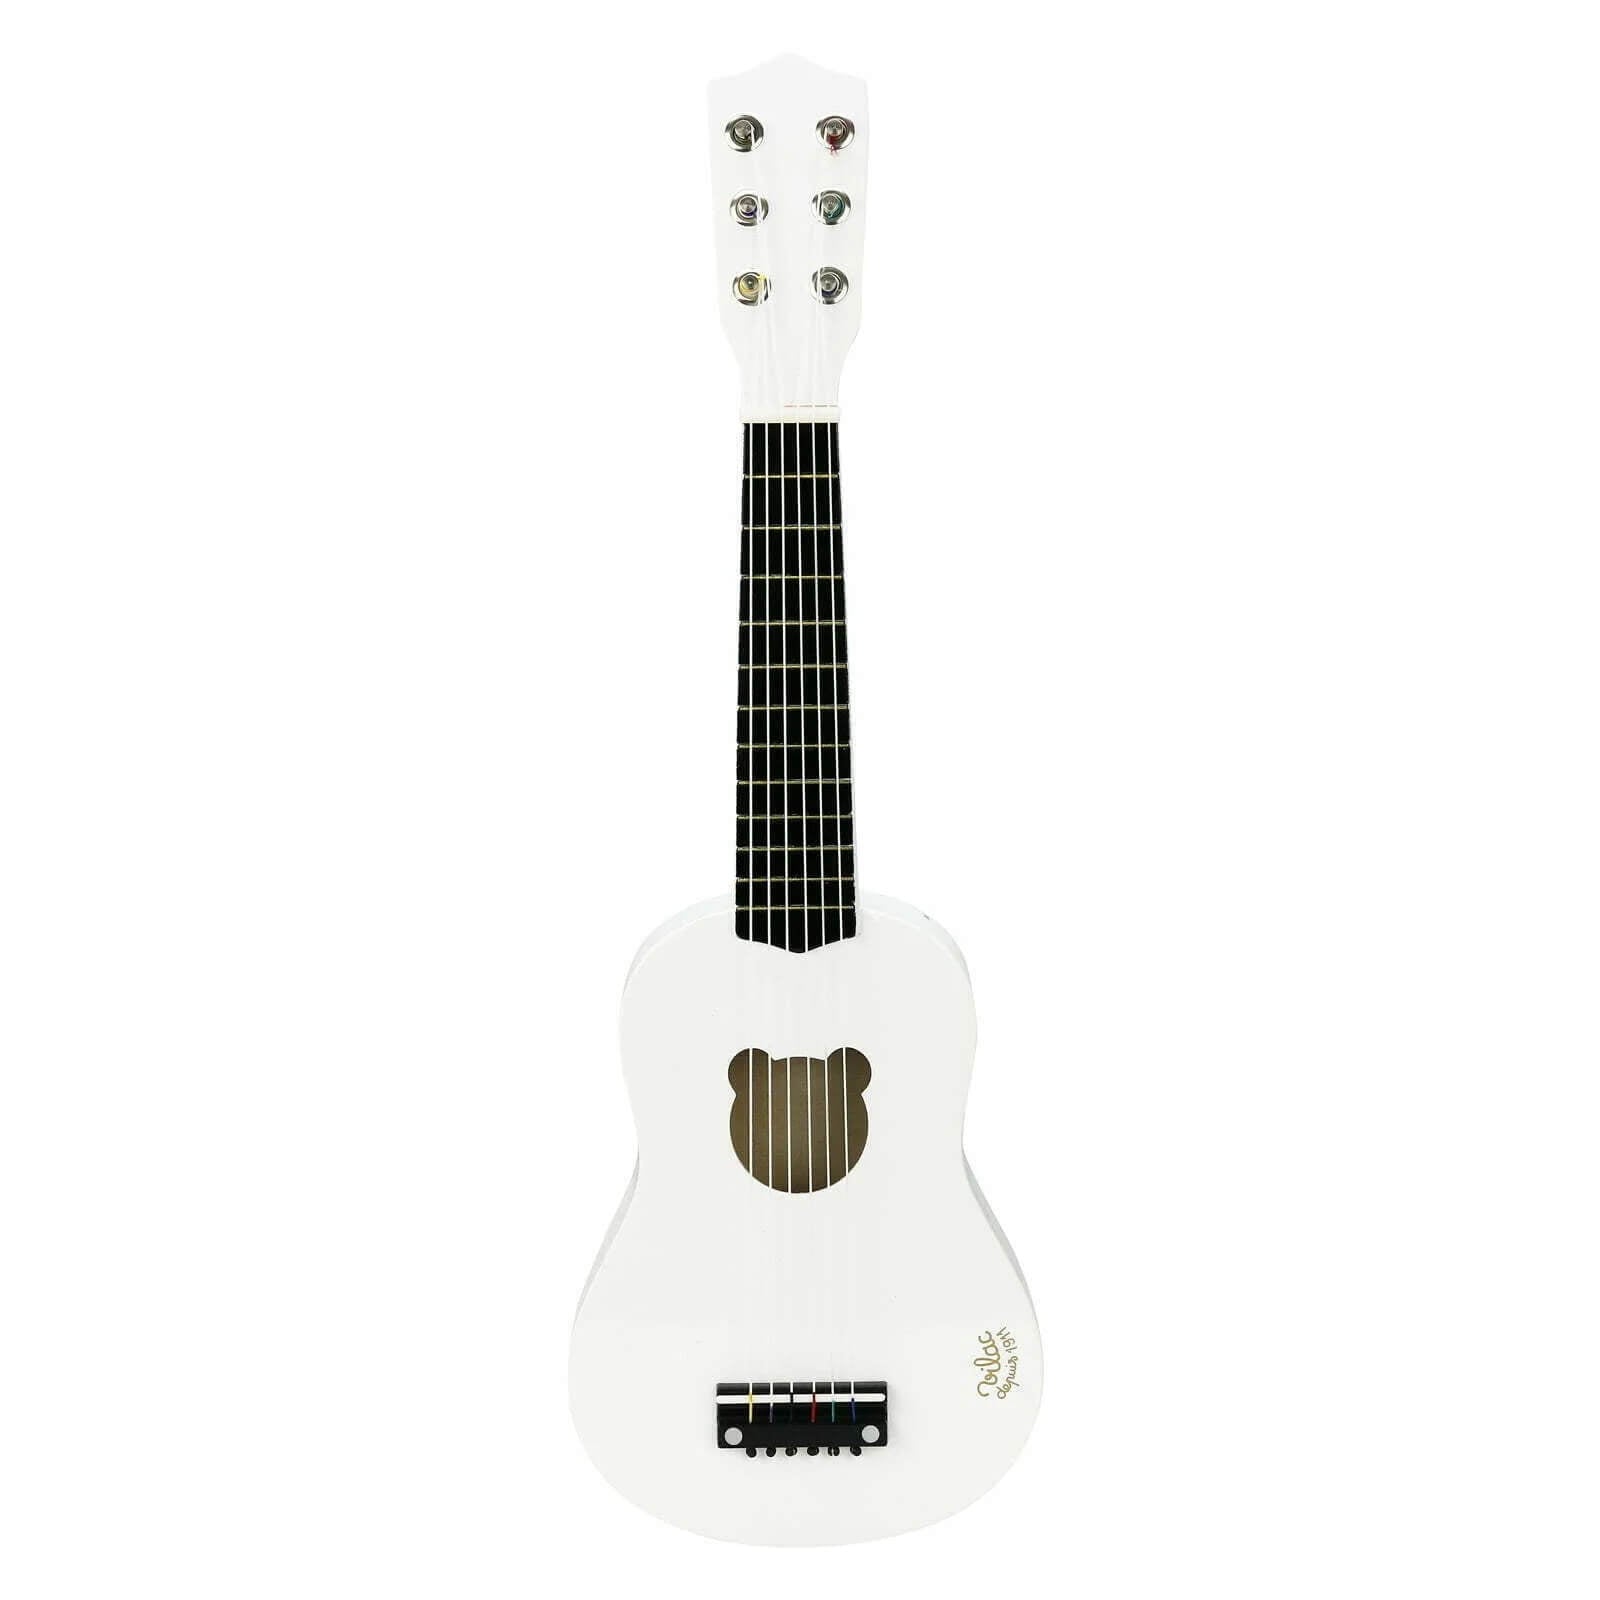 Vilac Classic wooden children's guitar in white, with six real nylon strings, 1 spare and 1 pick.